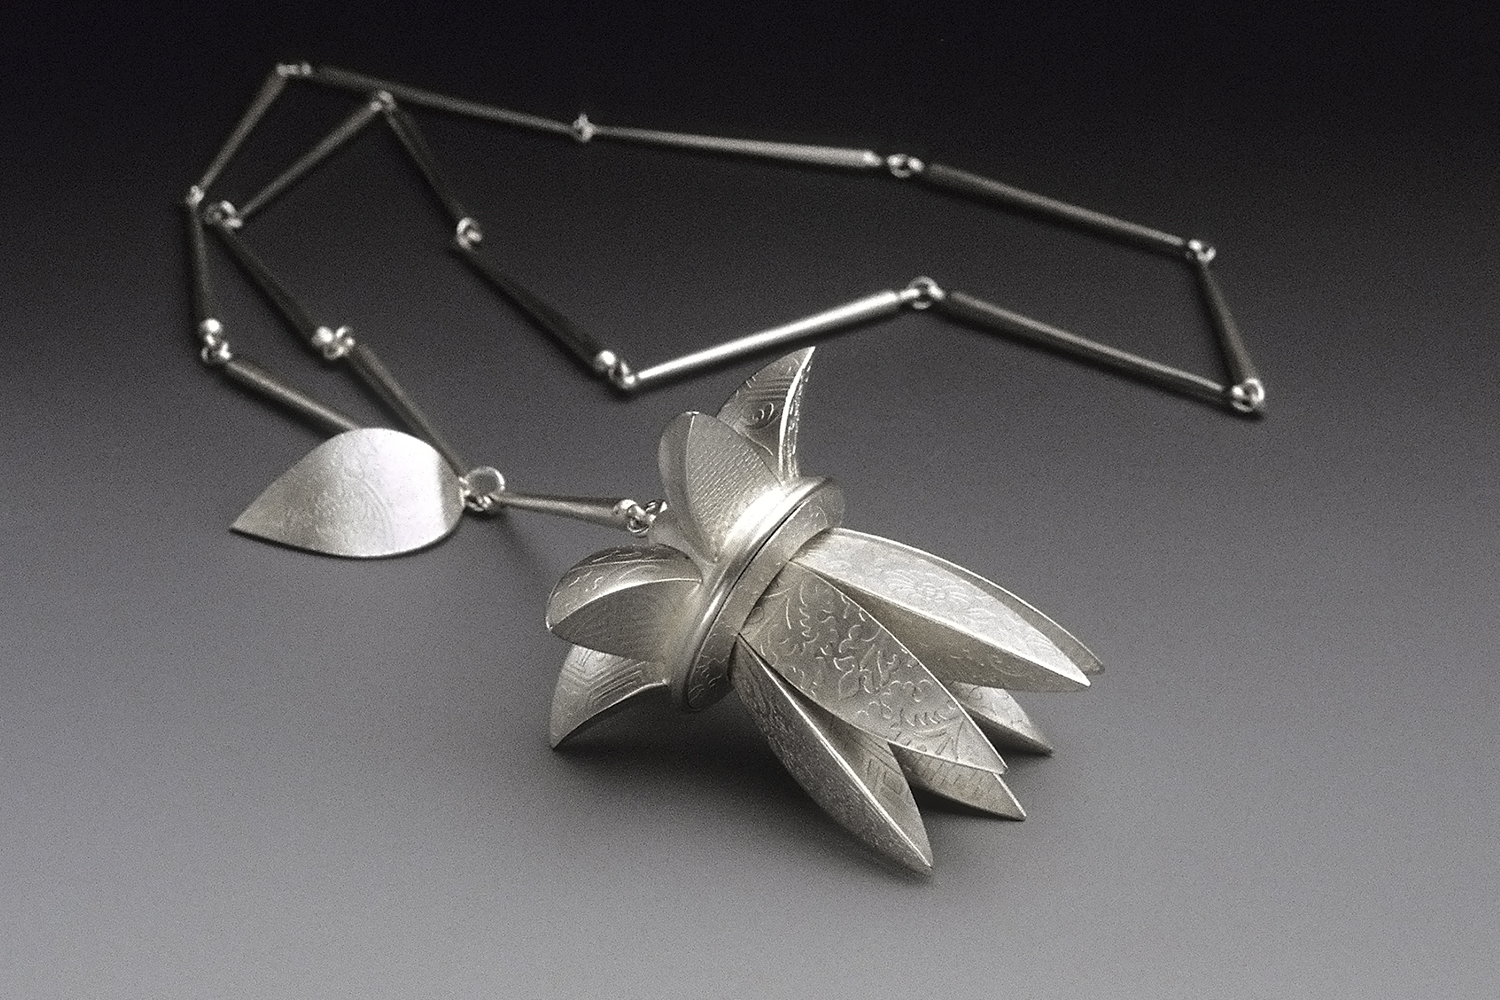 Flower Pendant  |  sterling silver  |  3.125 x 2.675 x 2.675 inches  |  2000